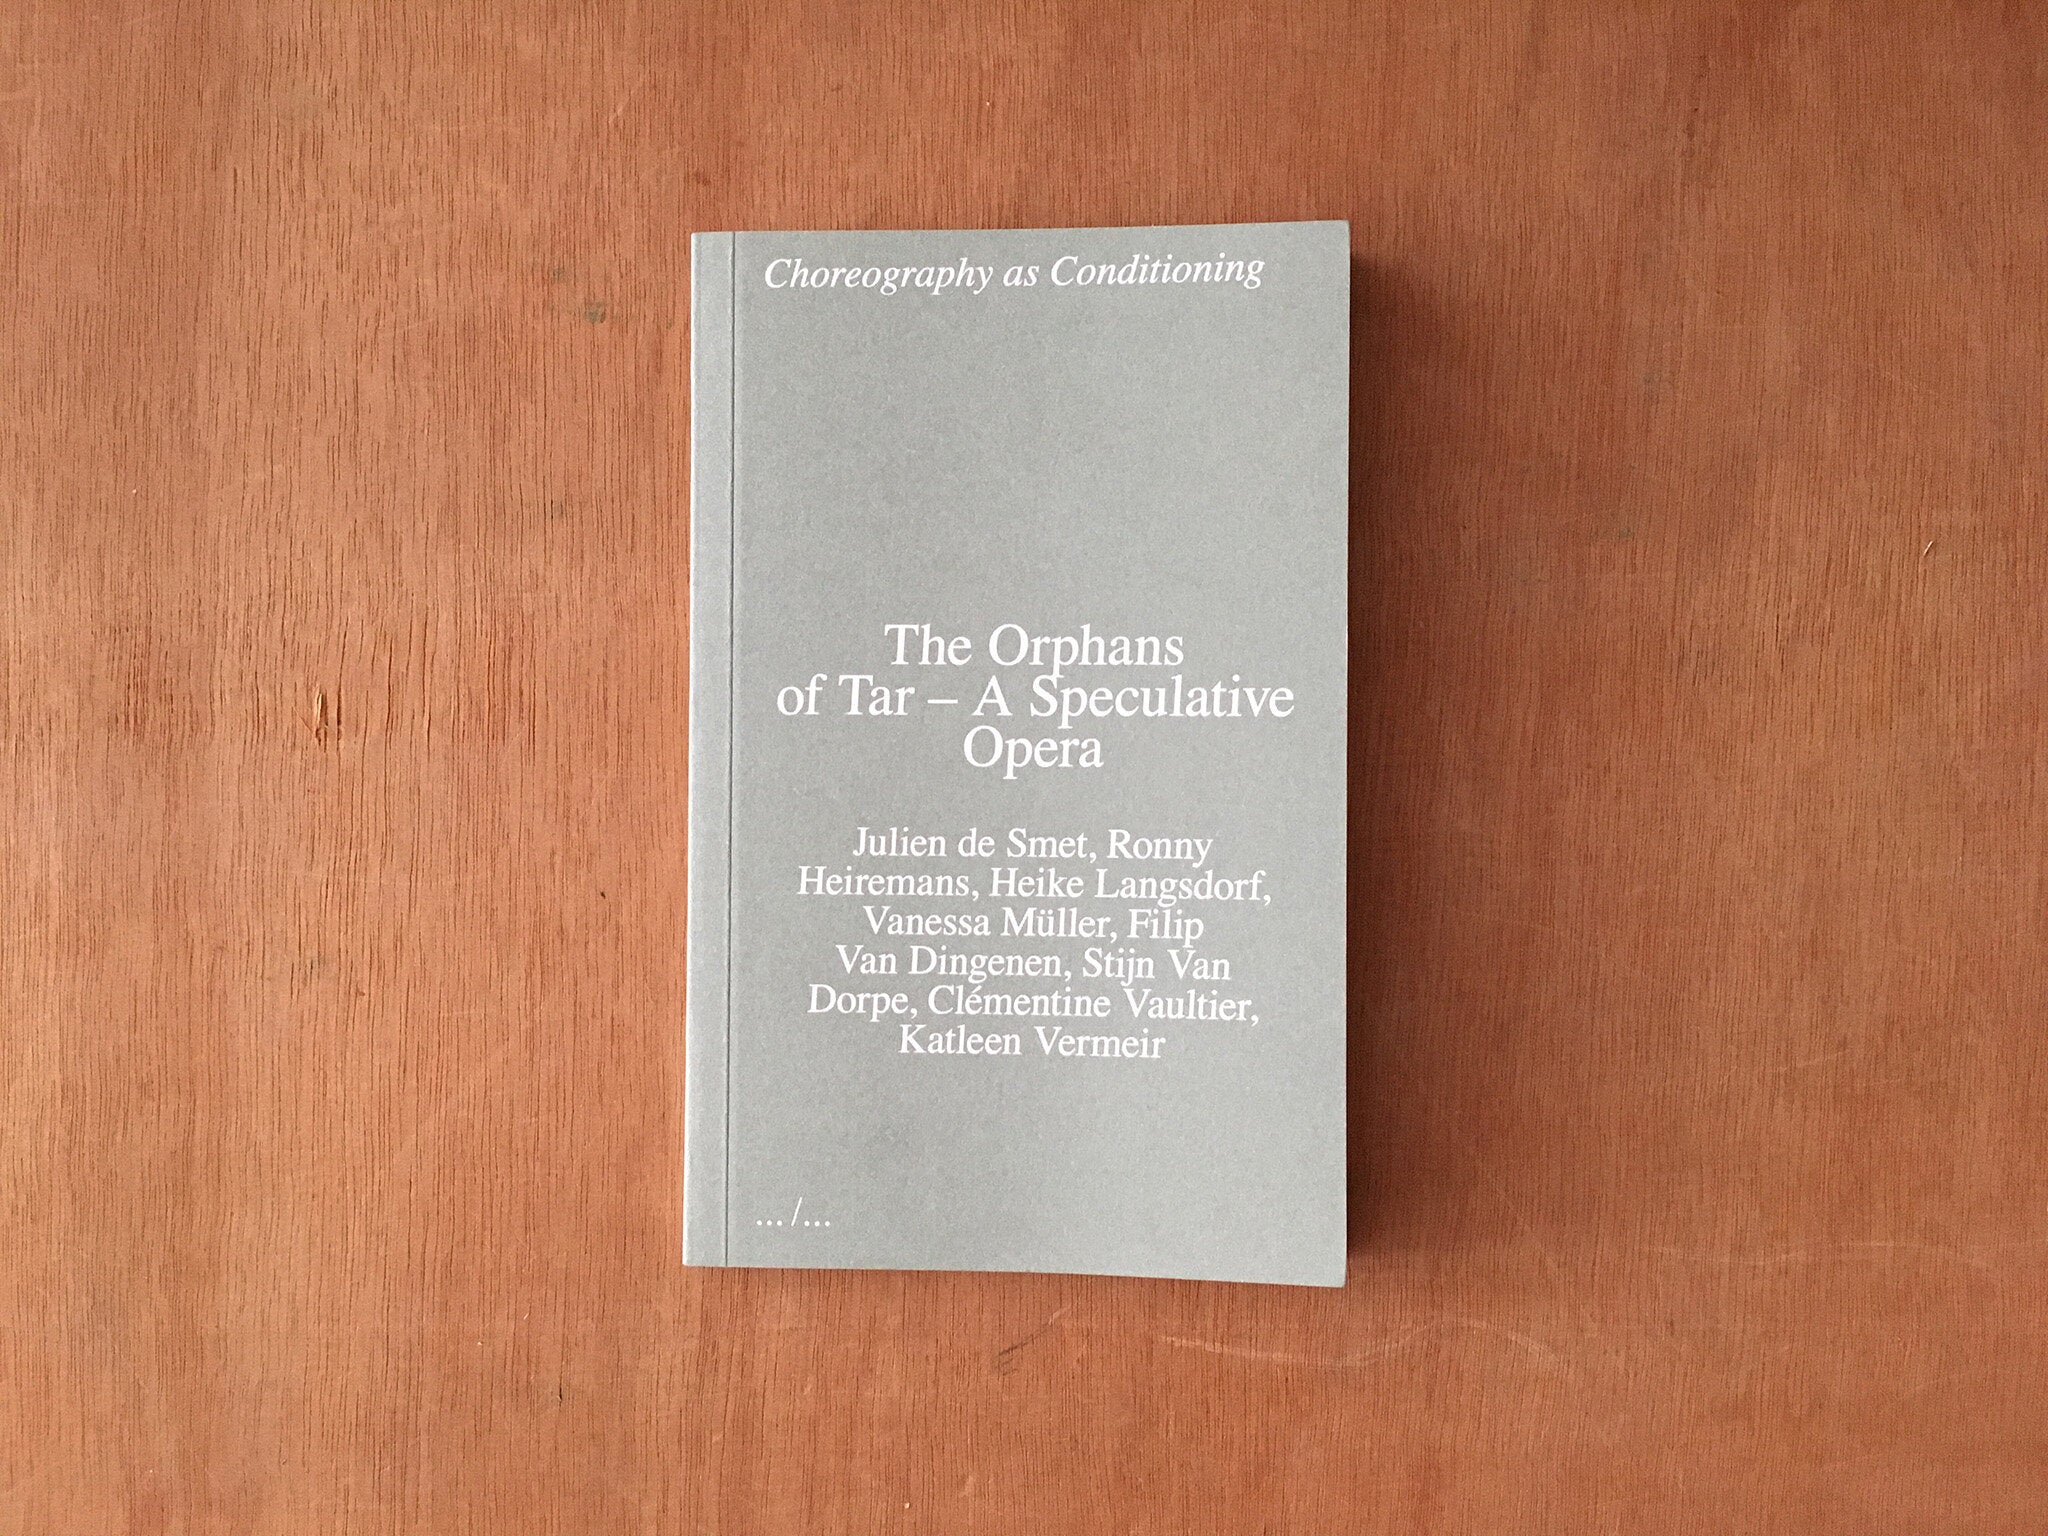 THE ORPHANS OF TAR – A SPECULATIVE OPERA edited by Various Artists